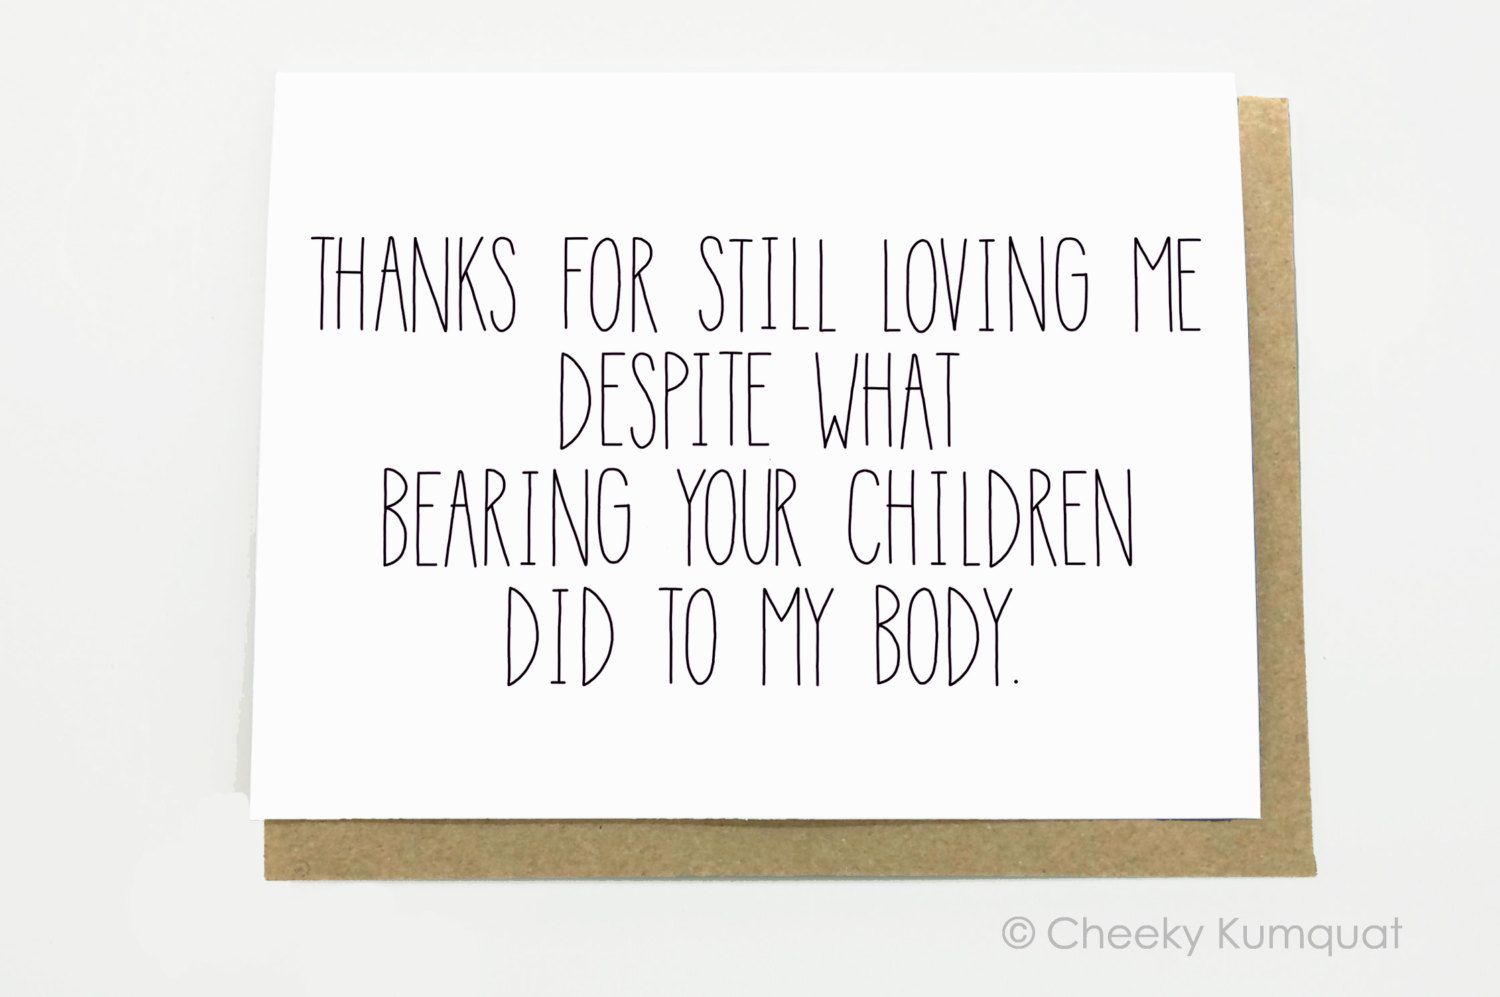 Funny Father's Day cards: Thanks for still loving me at Cheeky Kumquat